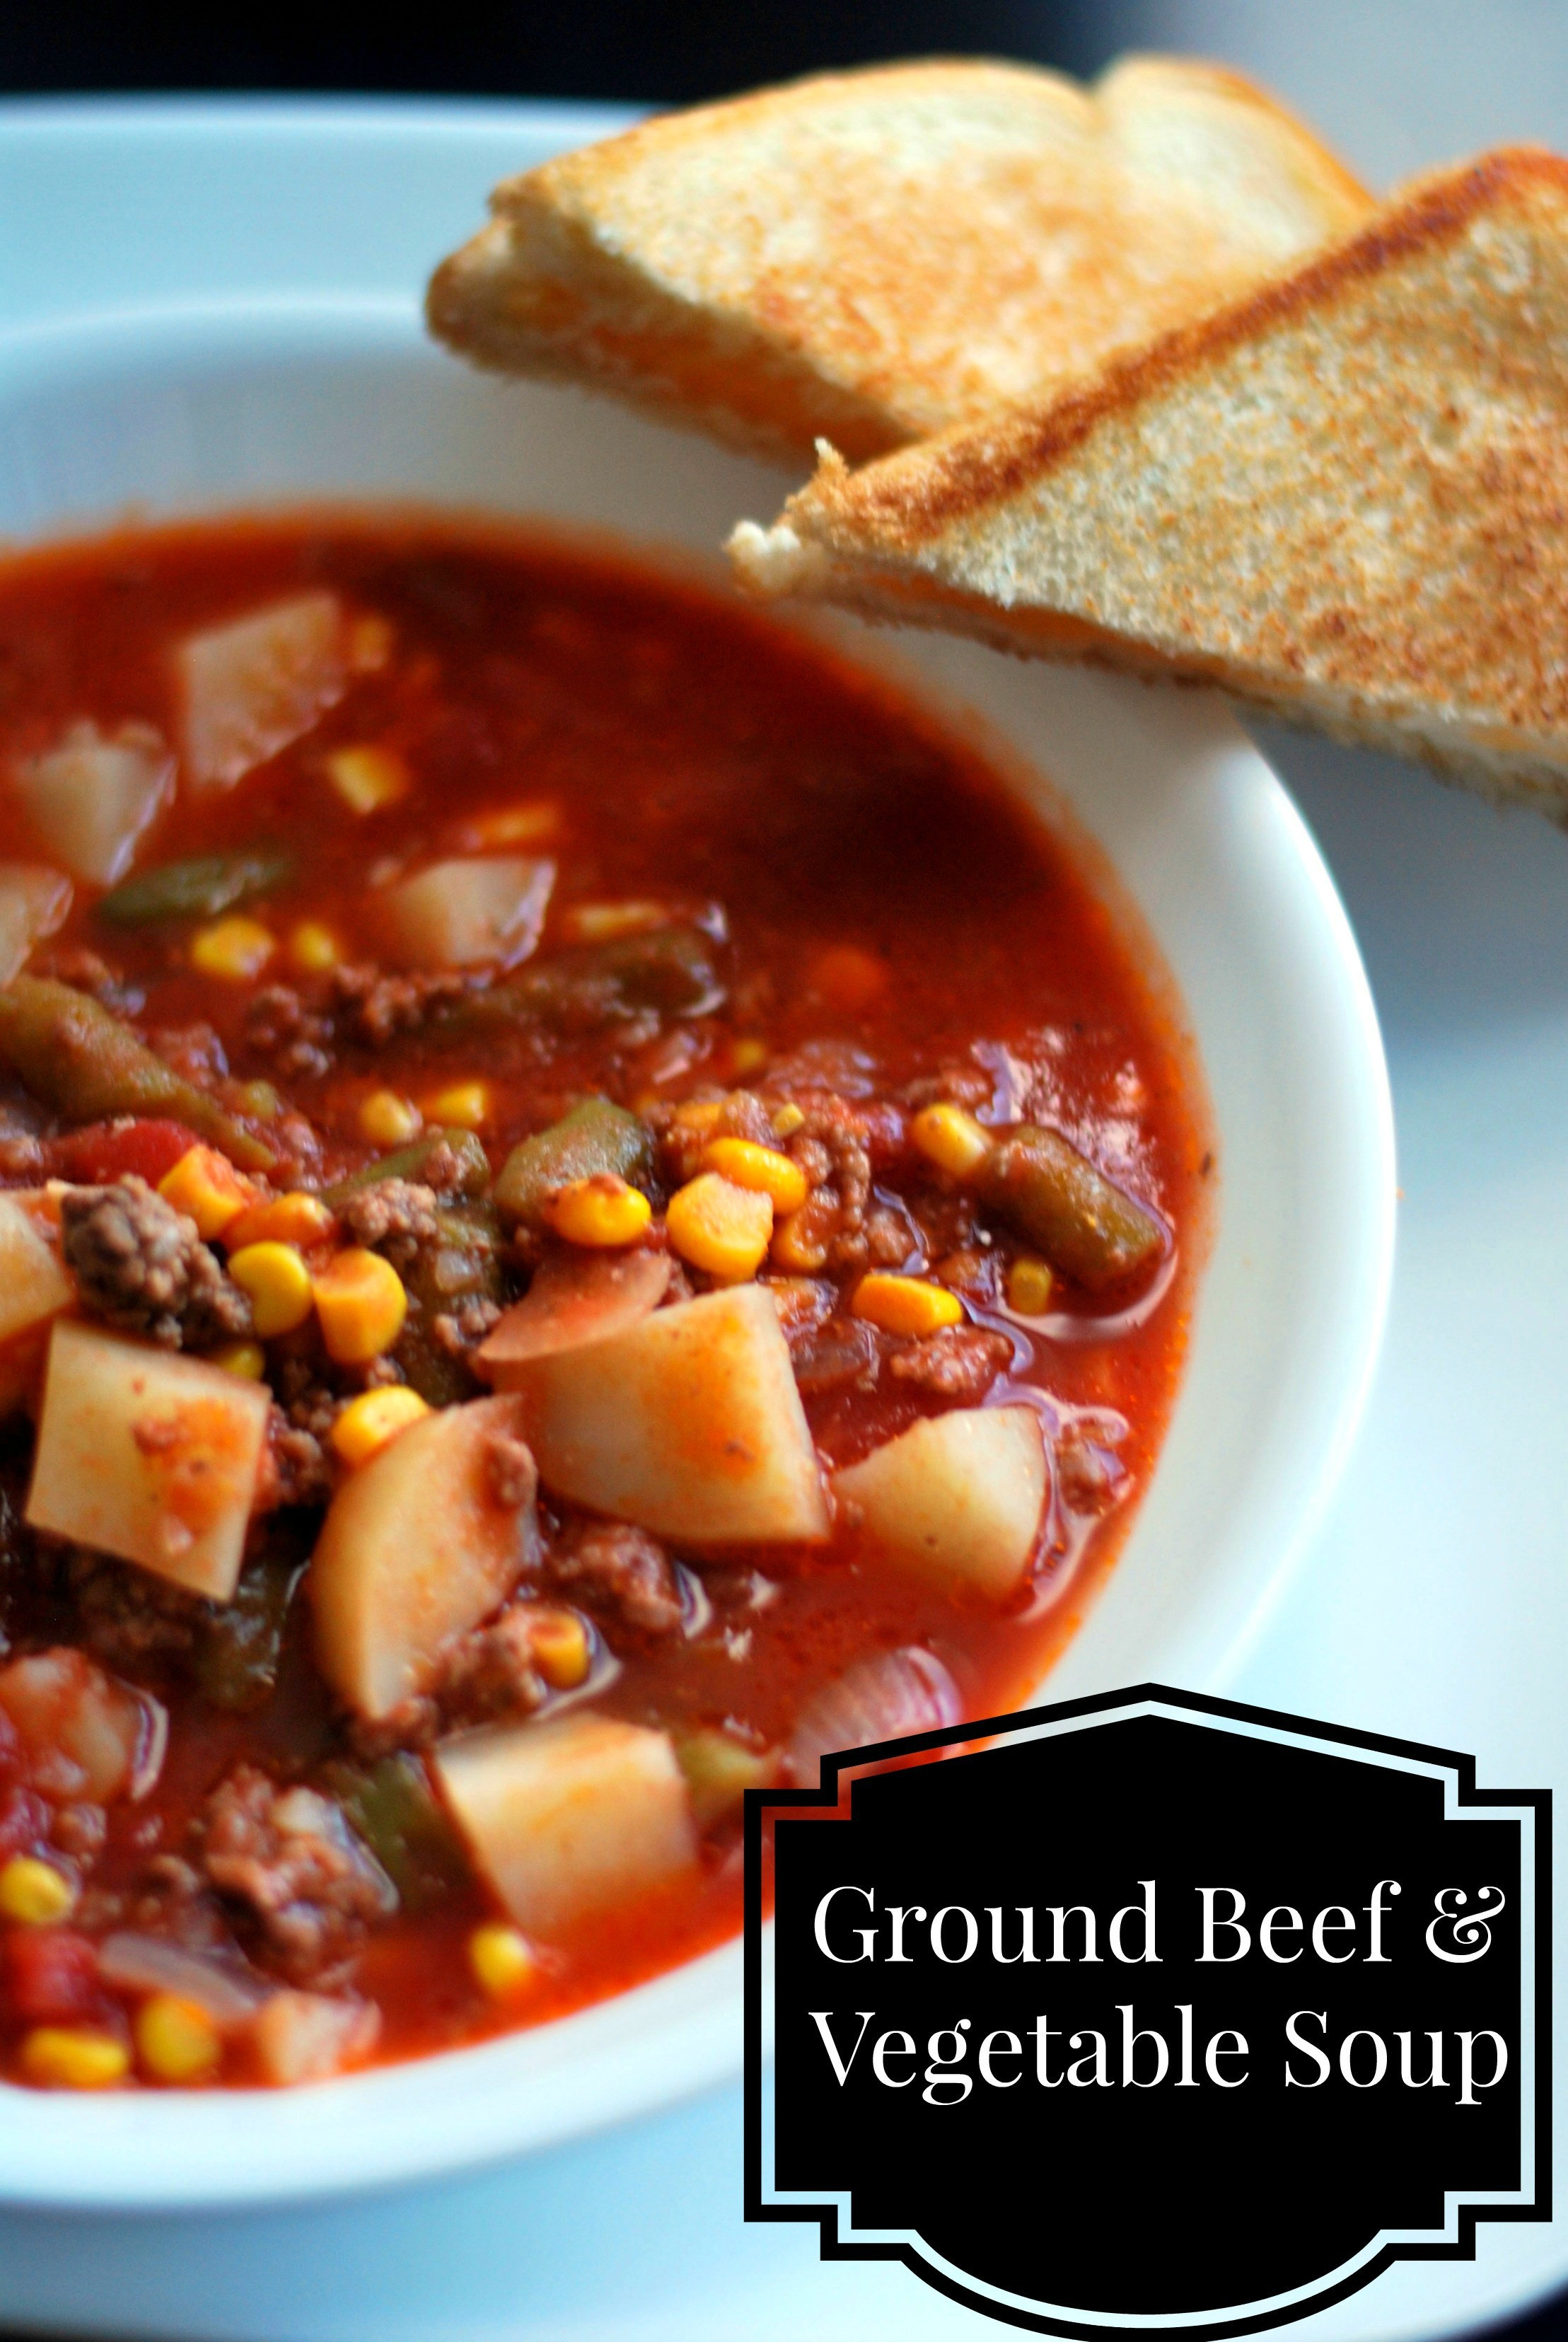 Soup Recipes With Ground Beef
 Nana s Ground Beef & Ve able Soup Aunt Bee s Recipes